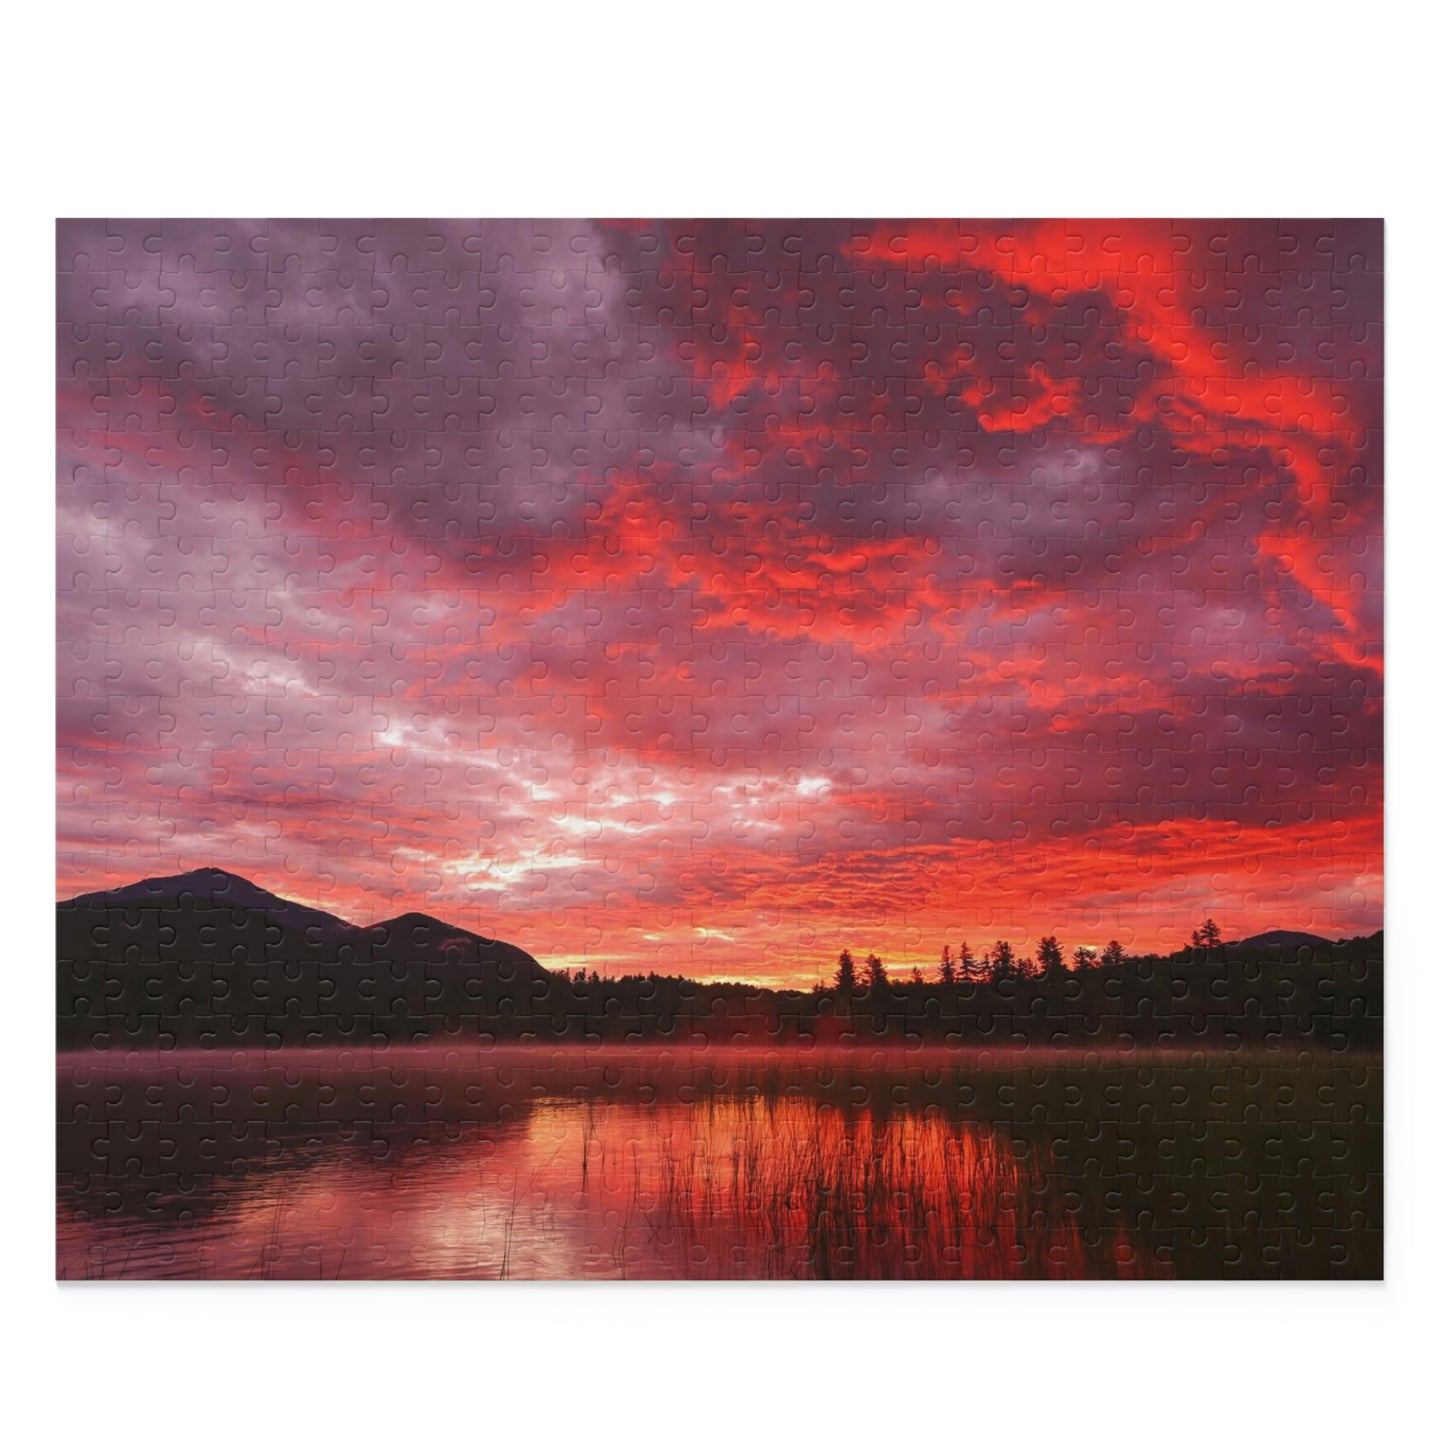 Puzzle - Fire in the Sky, Connery Pond